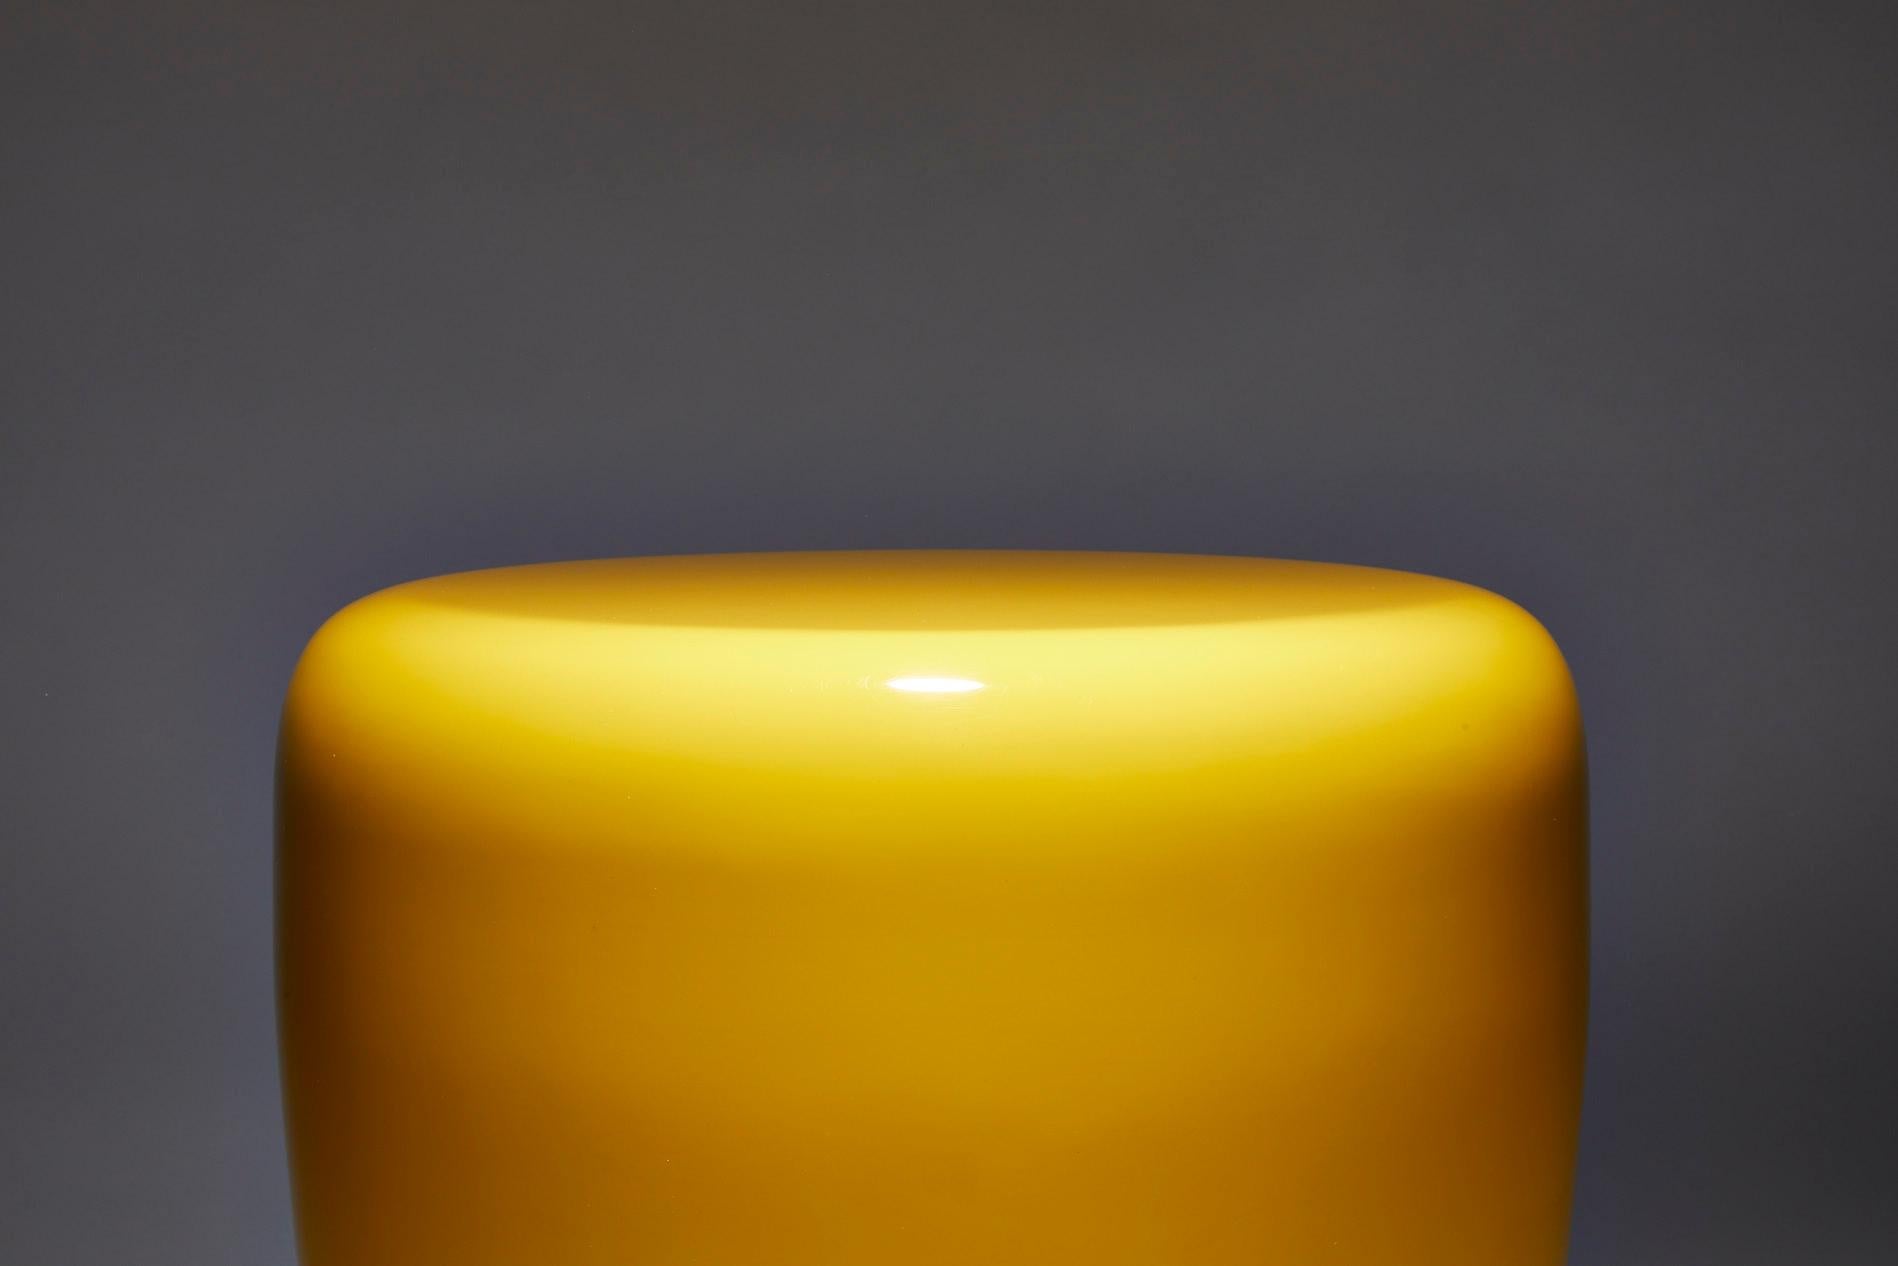 Lacquered Side Table, Saffron DOT by Reda Amalou Design, 2017 - Glossy or mate lacquer For Sale